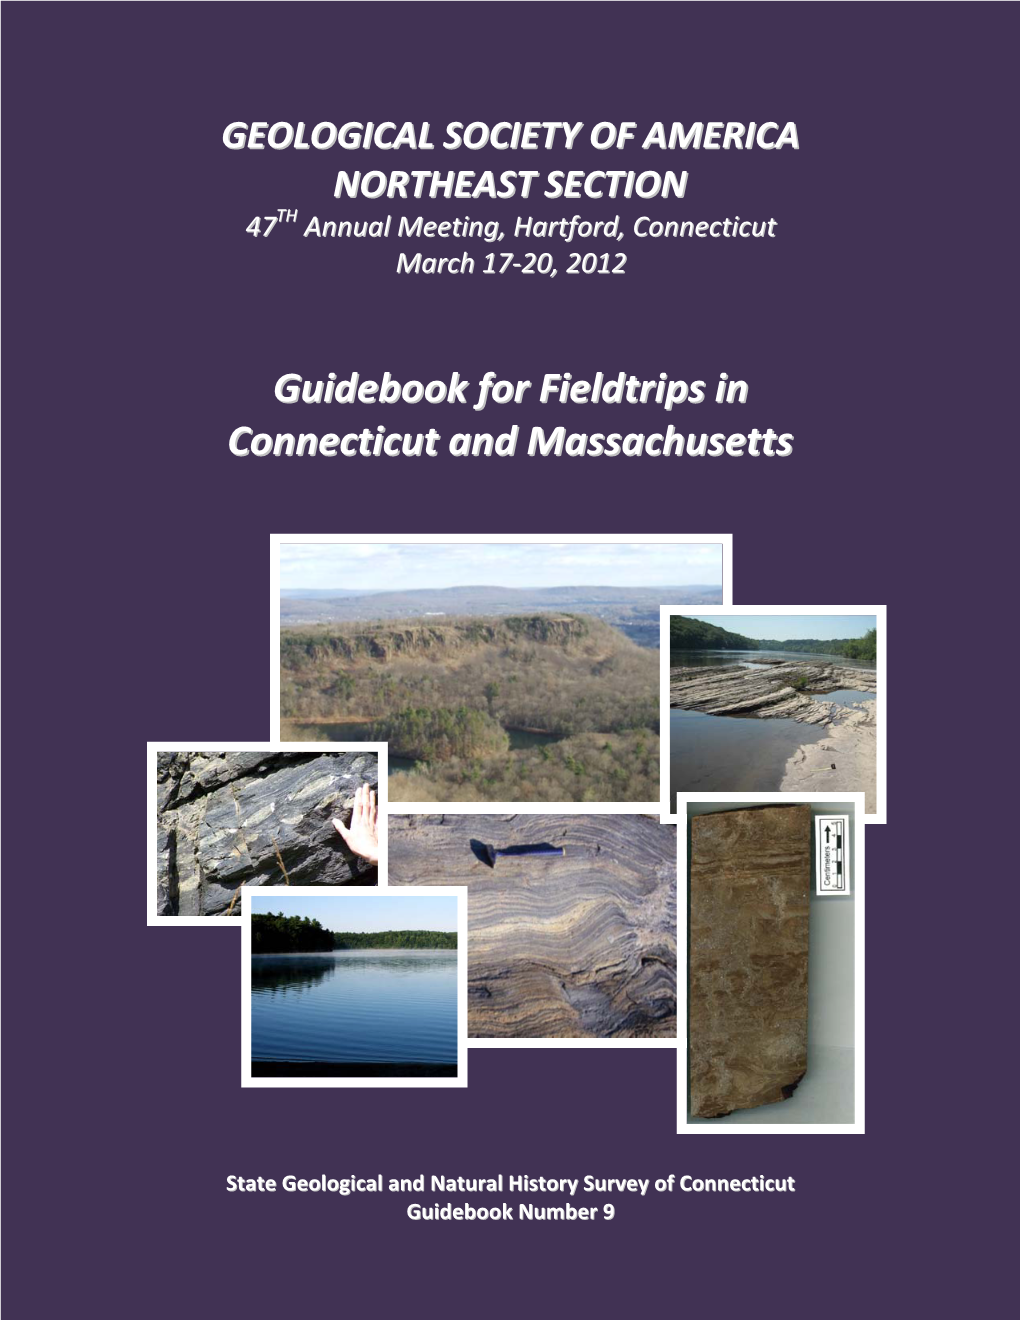 Guidebook for Fieldtrips in Connecticut and Massachusetts